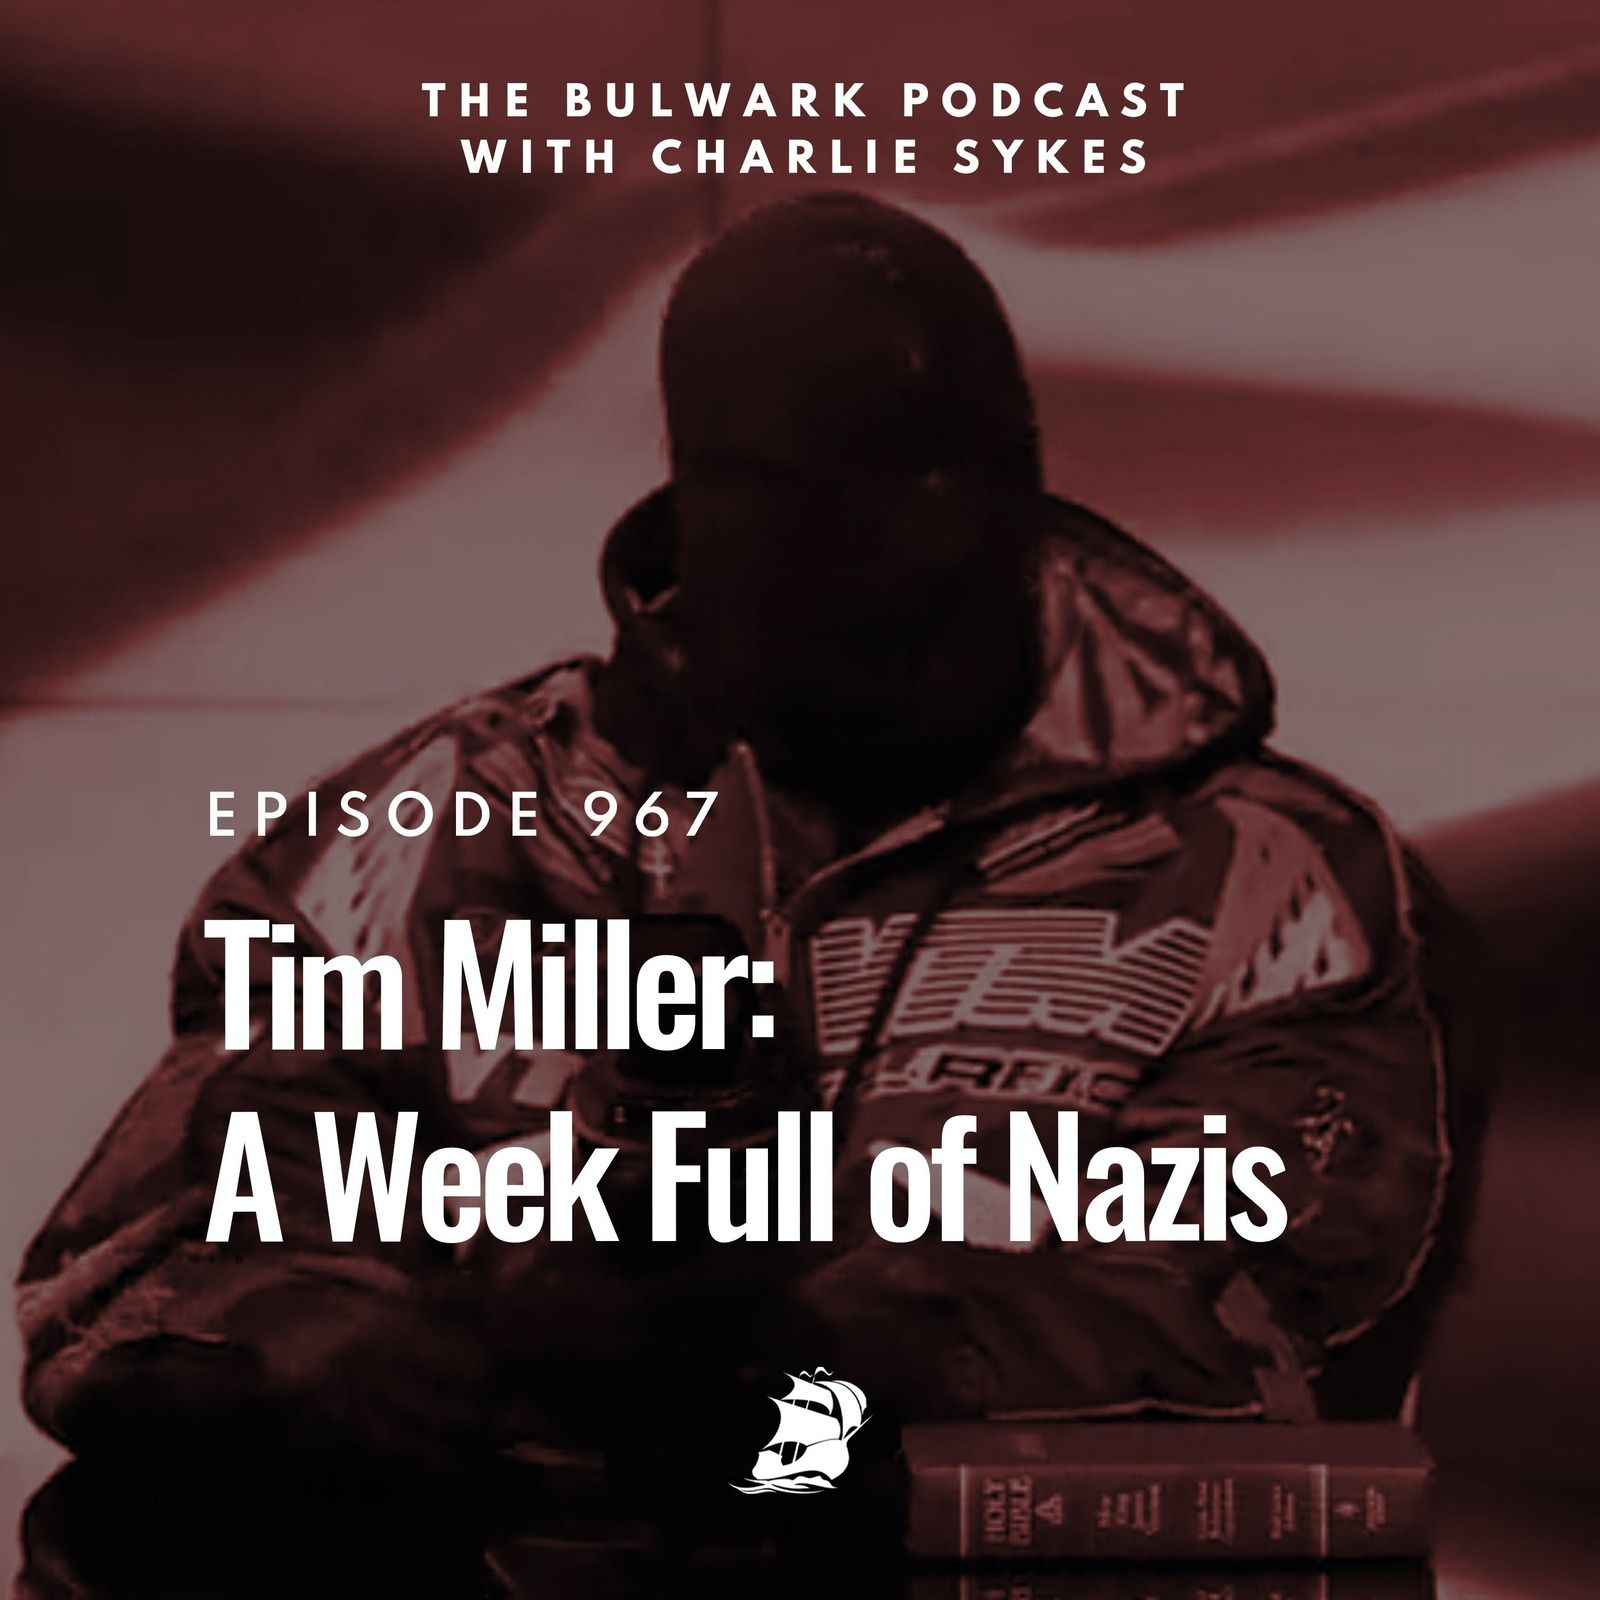 Tim Miller: A Week Full of Nazis by The Bulwark Podcast